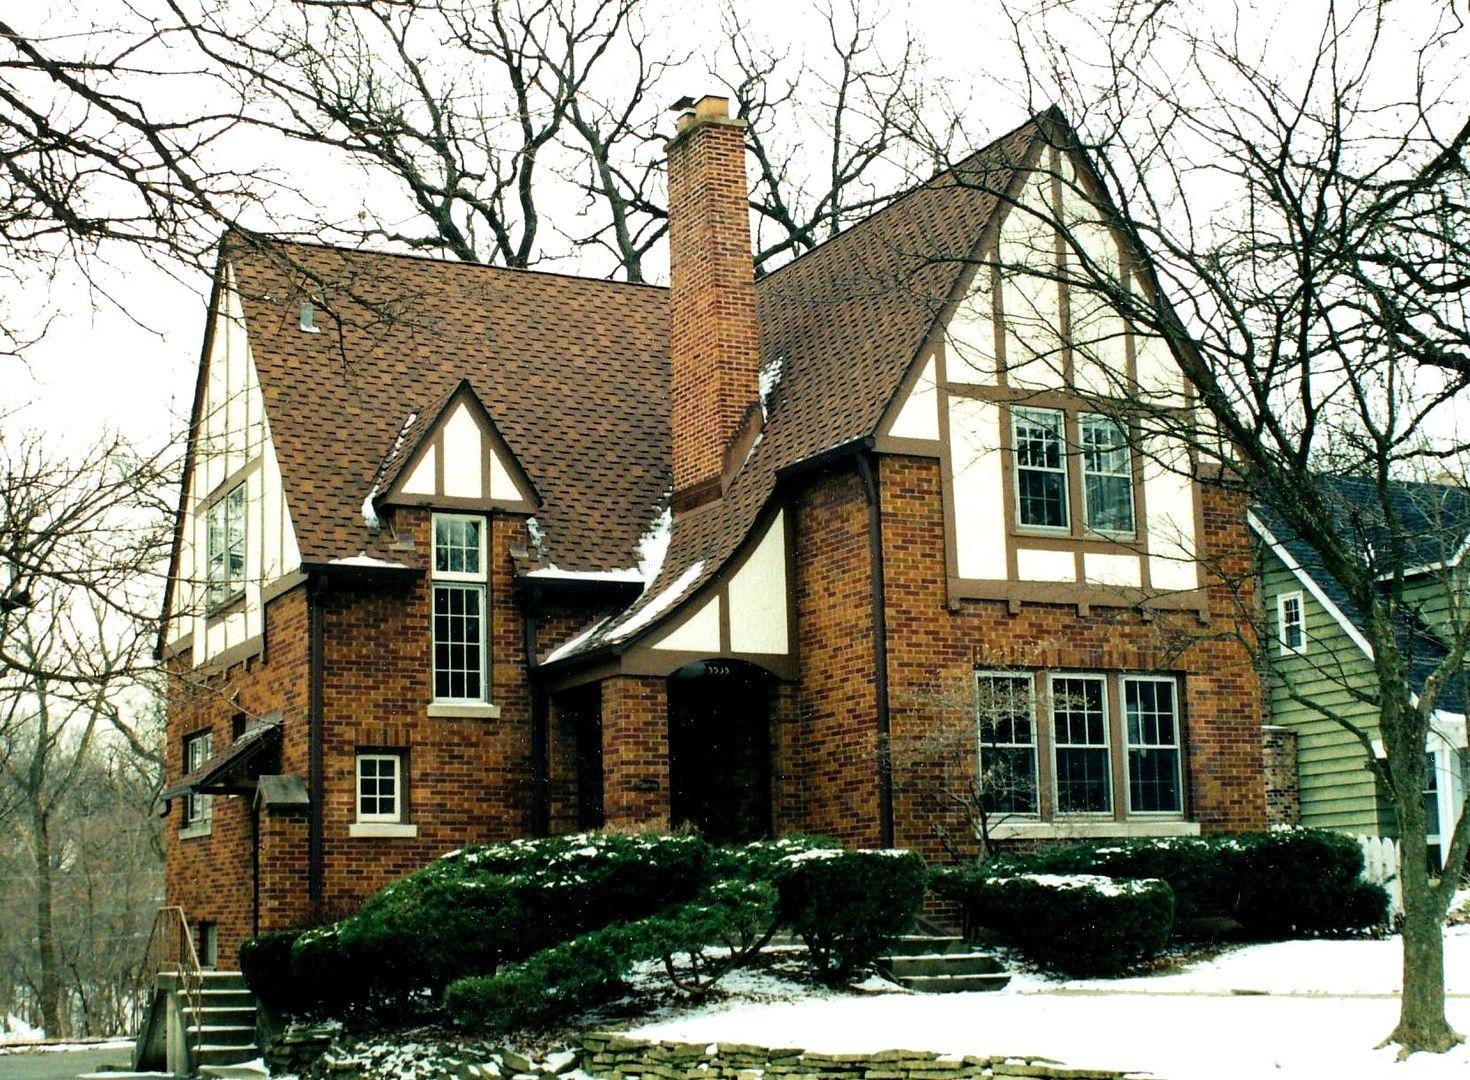 An Elmhurst in a Chicago suburb (originally discovered by Rebecca Hunter). 